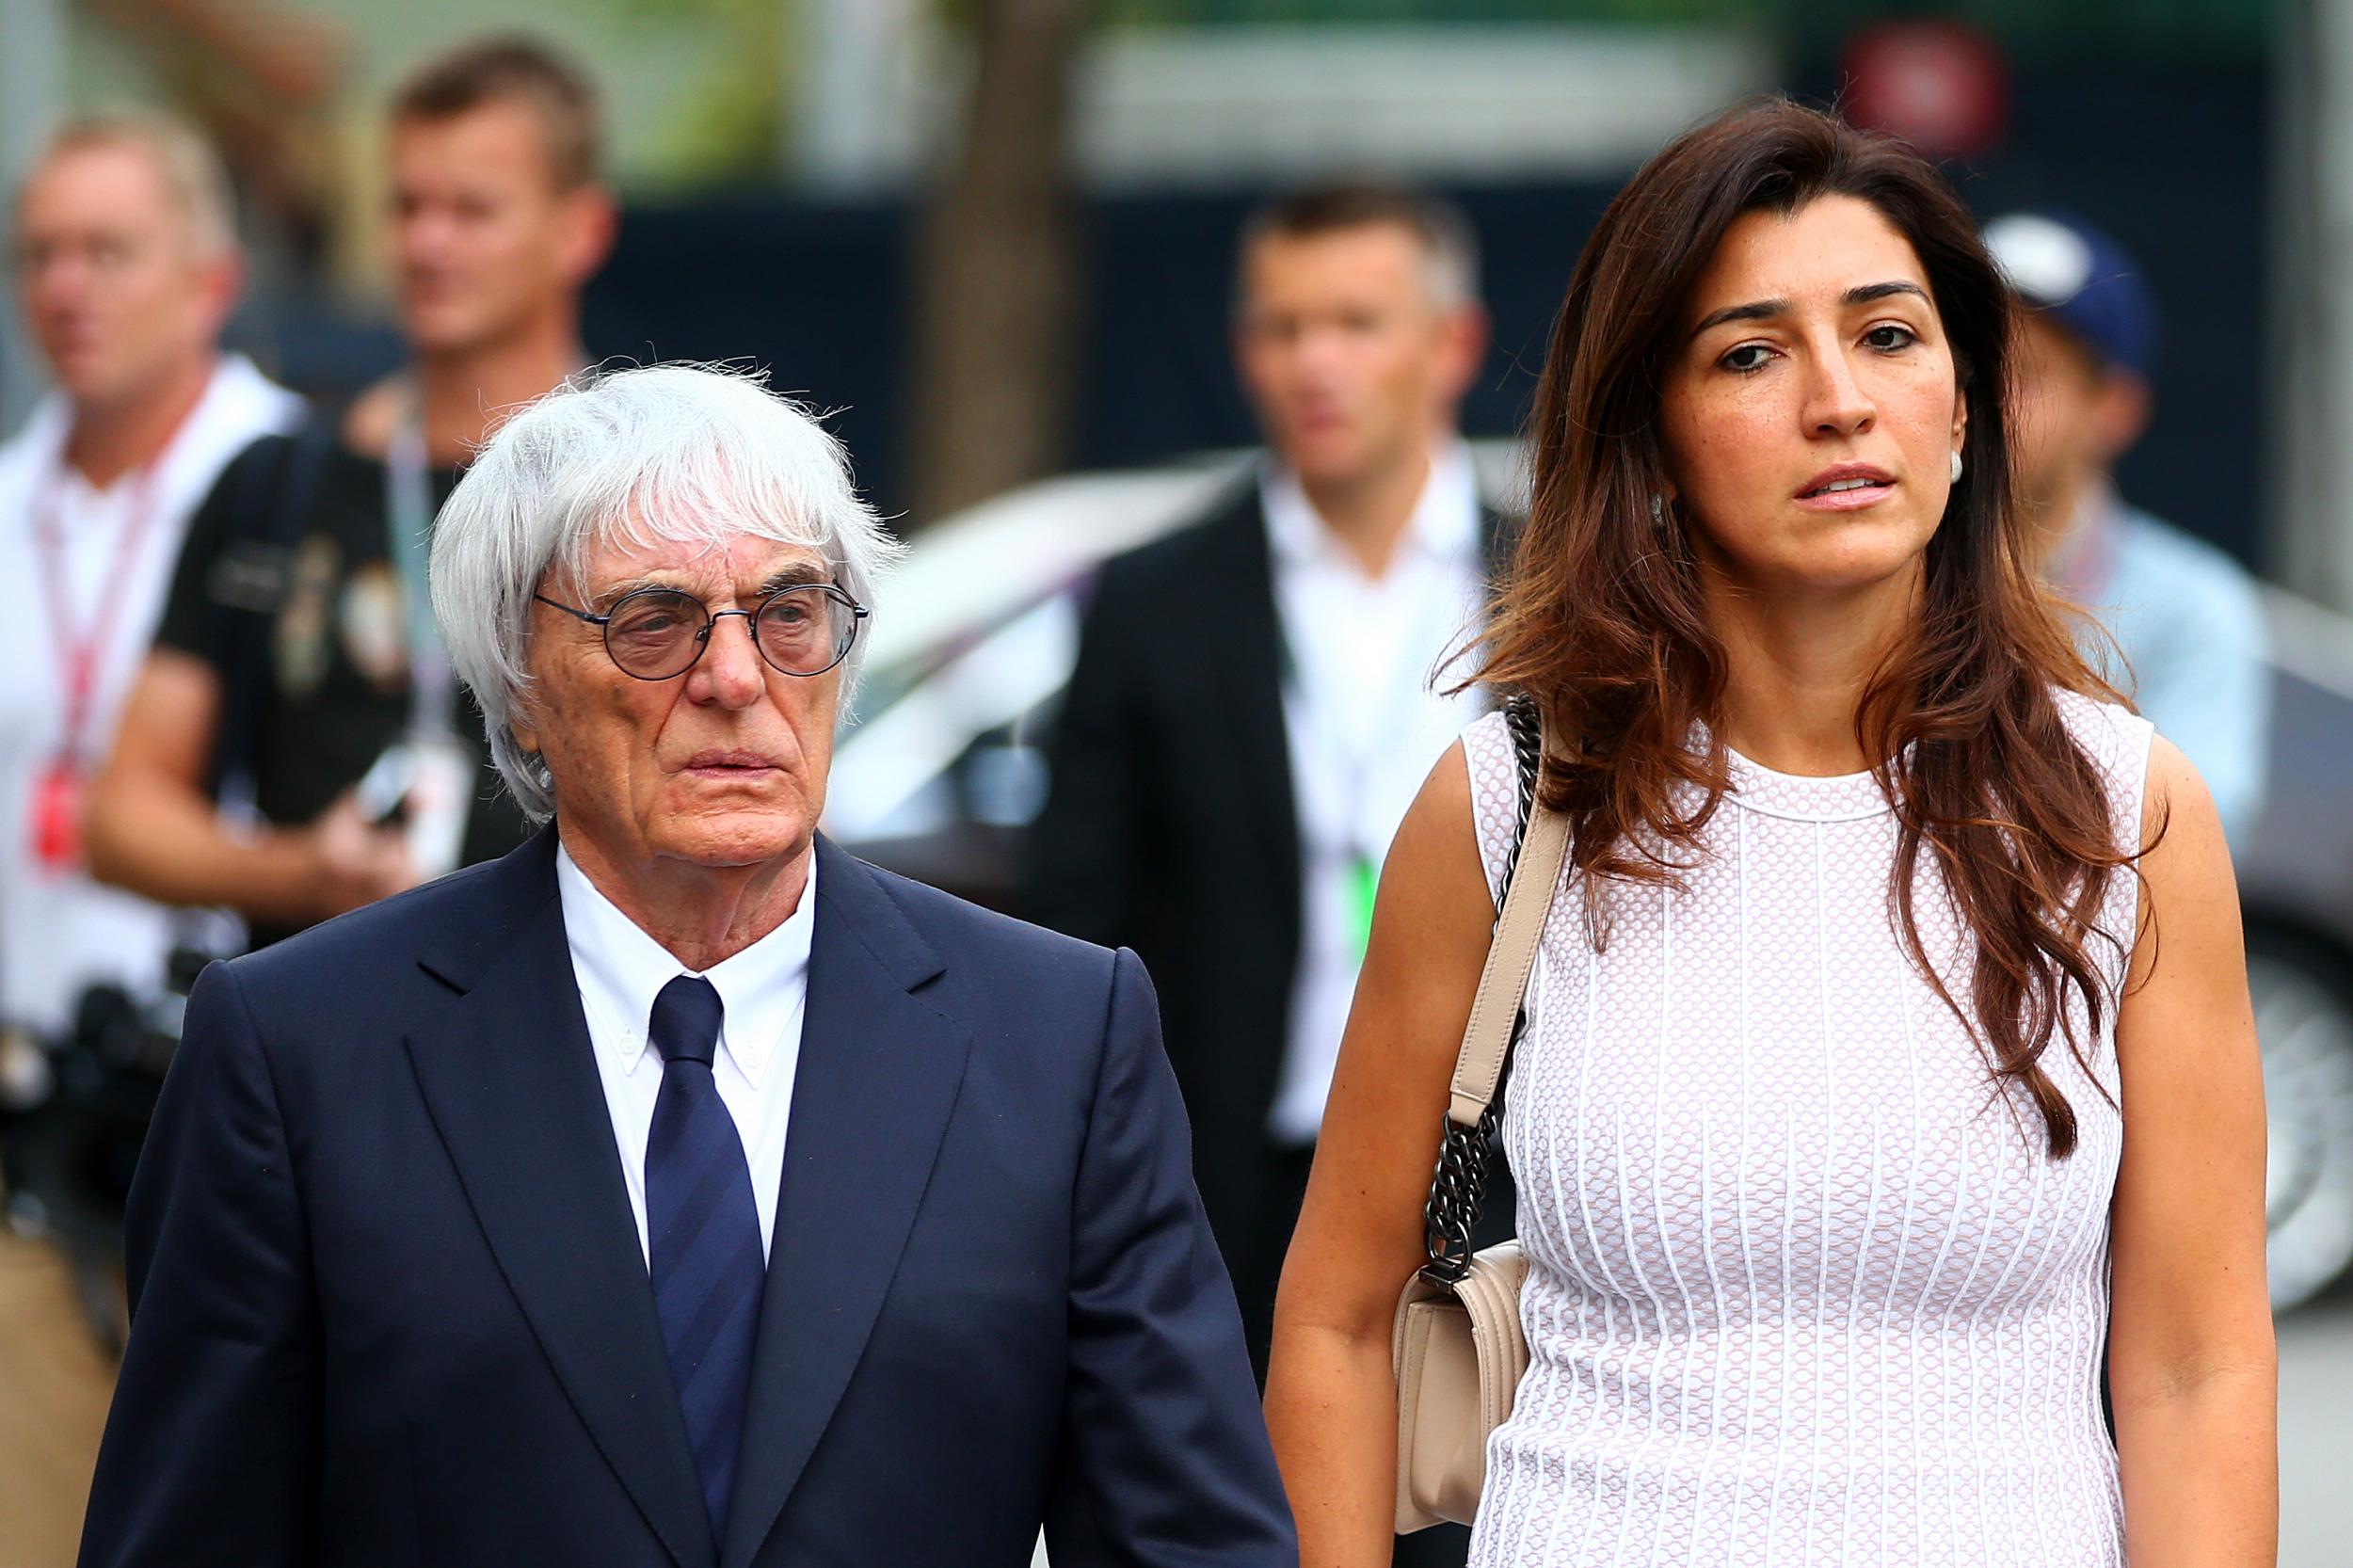 Bernie Ecclestone walks through the paddock with his wife Fabiana Flosi. Ms Flosi's mother has reportedly been kidnapped